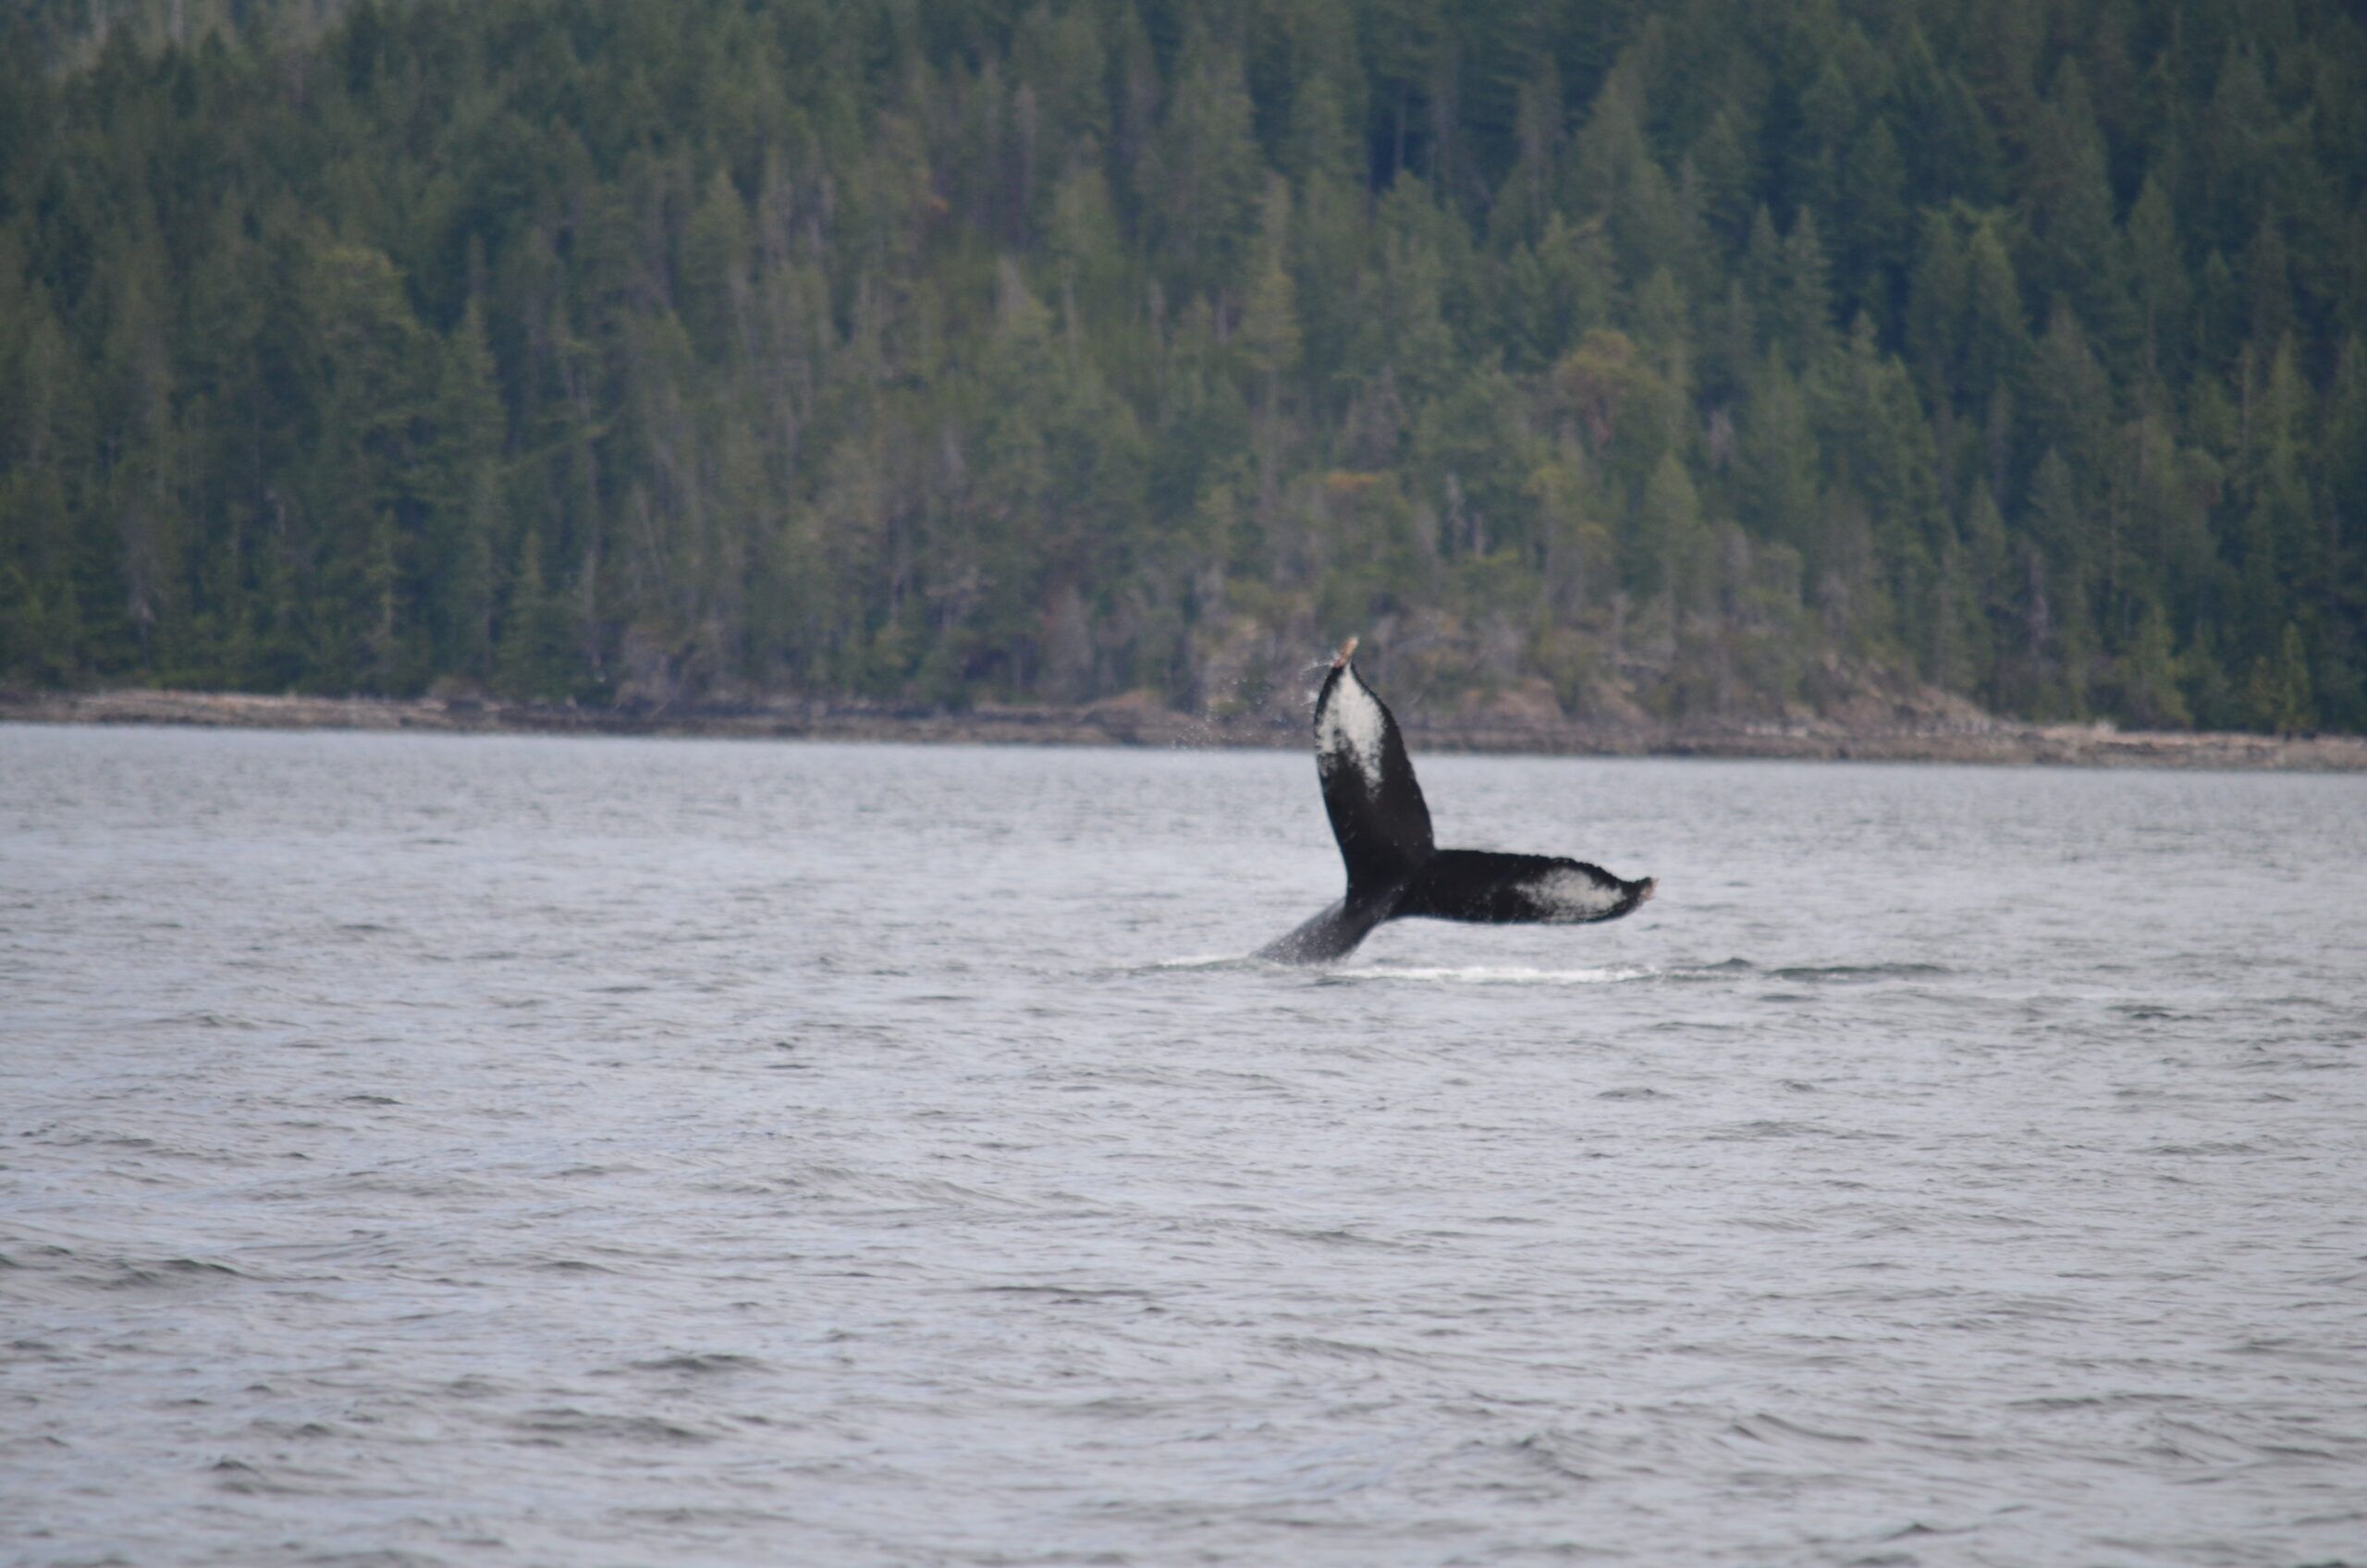 Humpback Whale Tail emerged from the water.